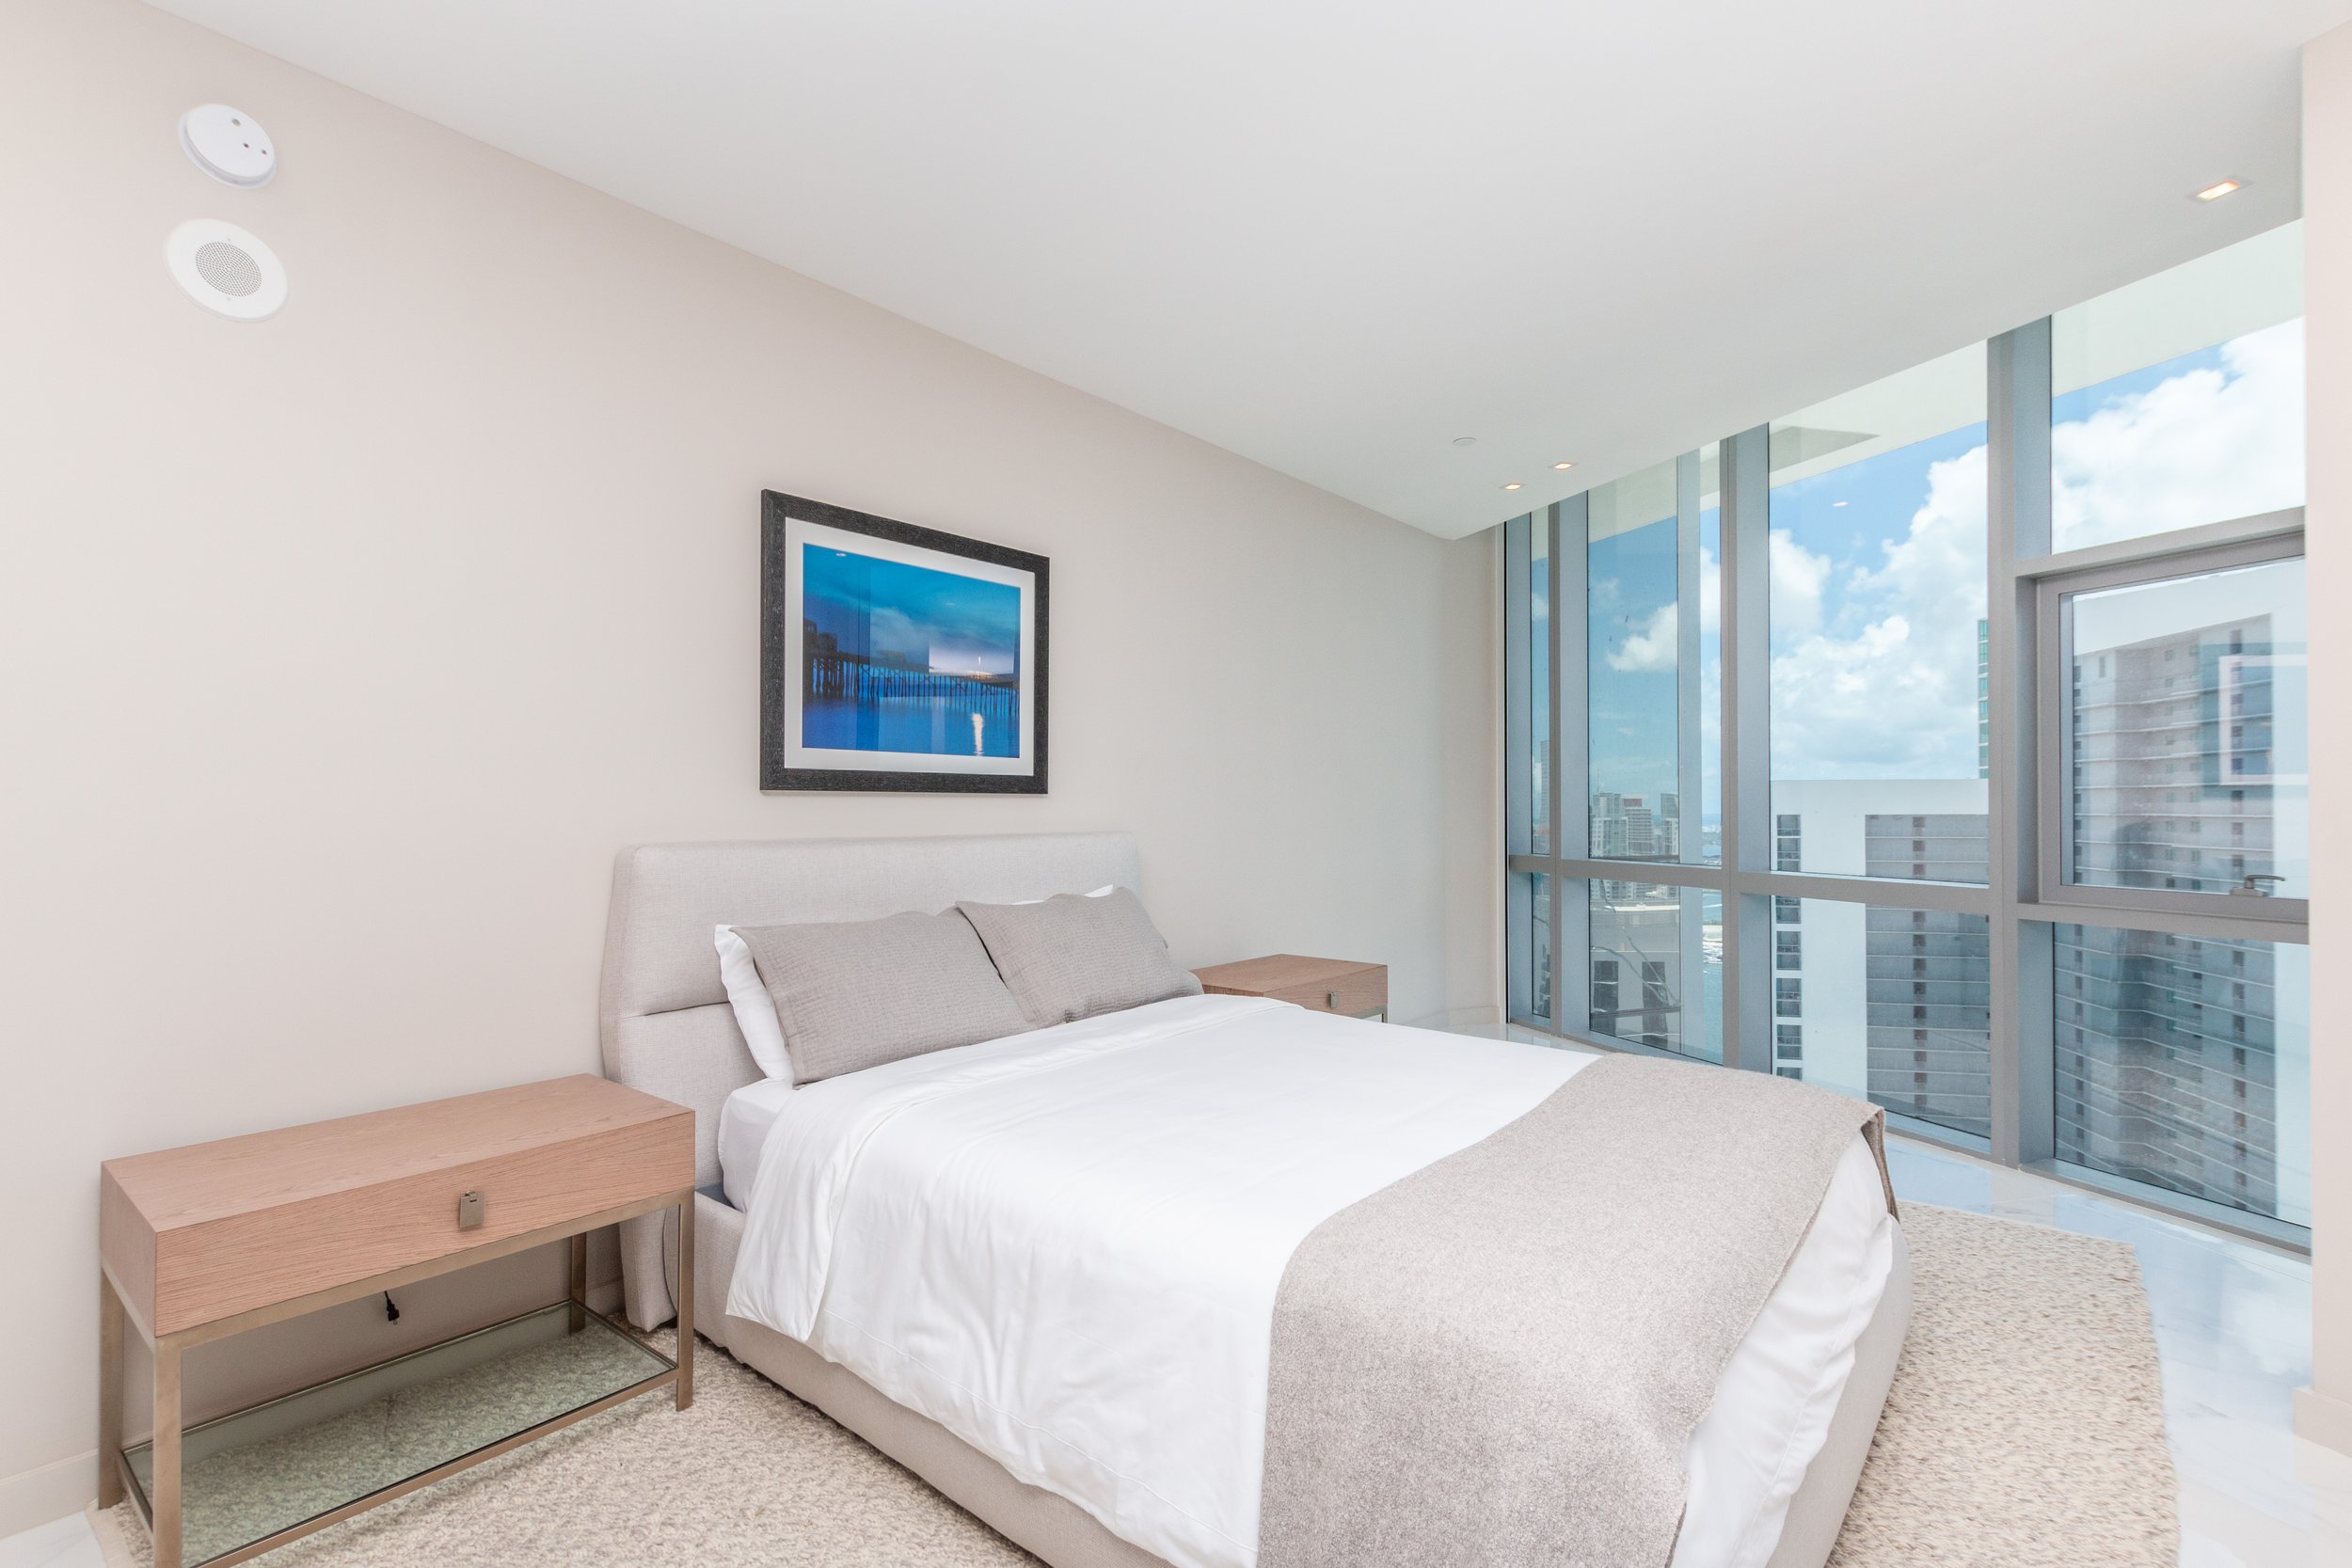 Step Inside A Sky-High Ultra-Luxe Penthouse At PARAMOUNT Miami Worldcenter For Rent Asking $40K Per Month ALTARA Properties Scott Lawrence Porter 1.64.jpg